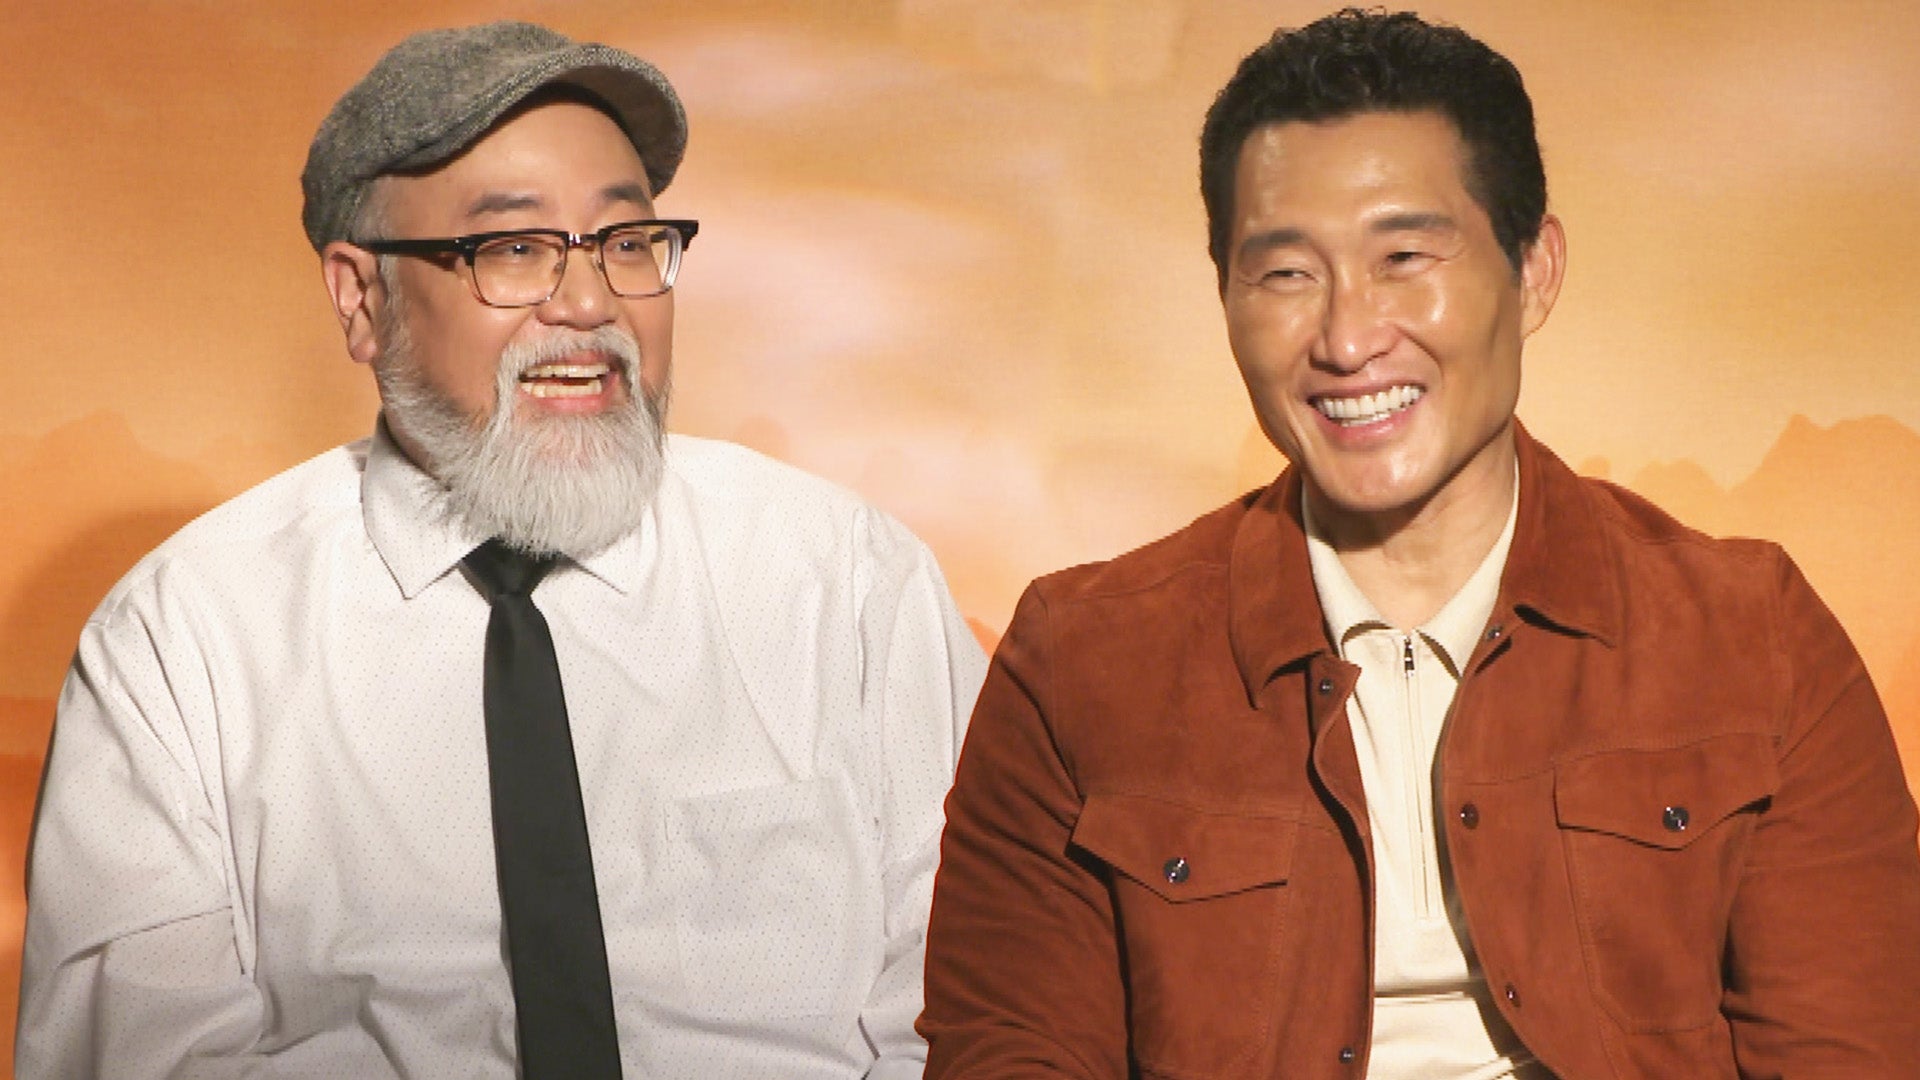 'Avatar: The Last Airbender': Daniel Dae Kim and Paul Sun-Hyung Lee on Key Changes (Exclusive)